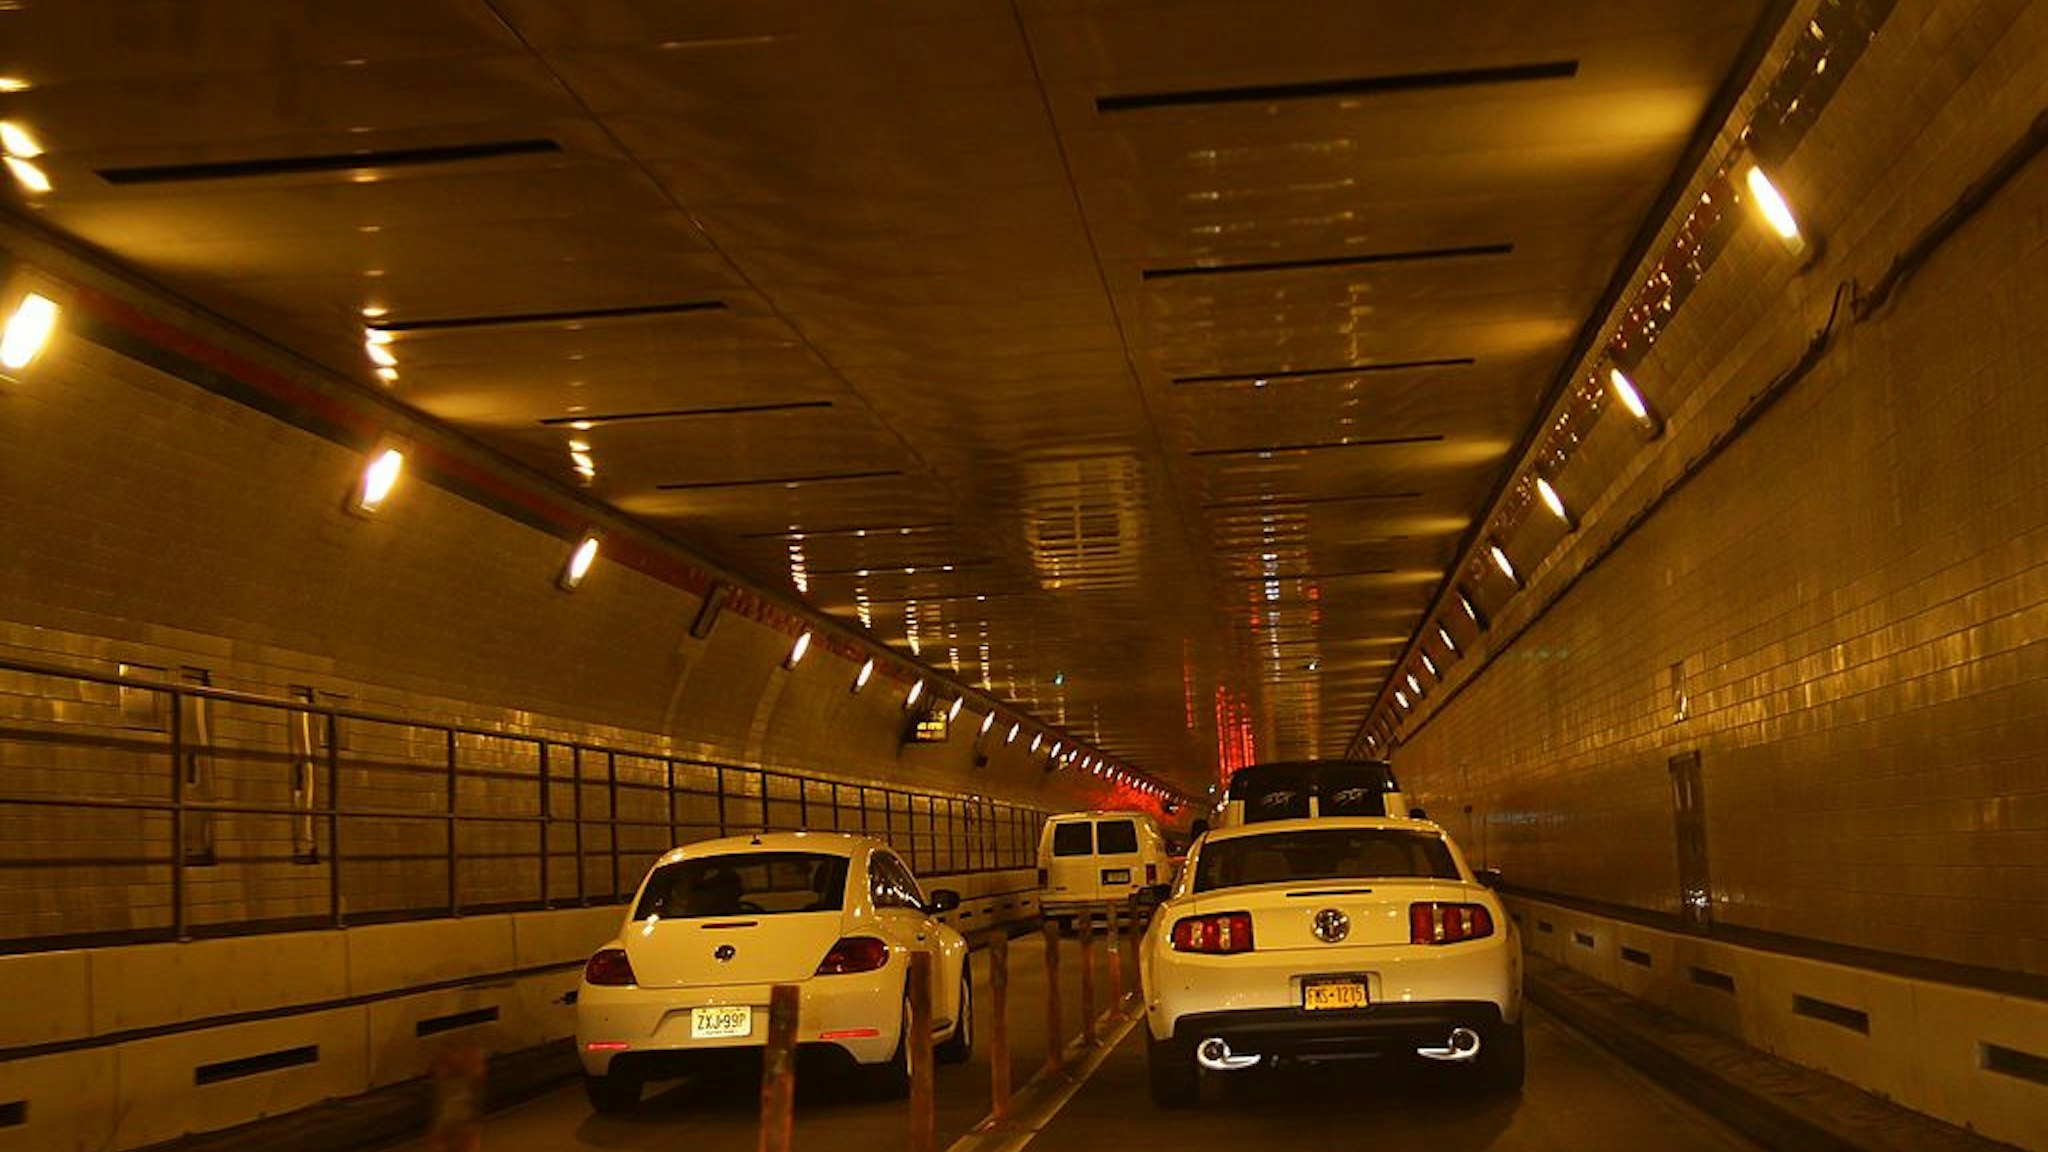 NEW YORK - MAY 11: Inside the Lincoln Tunnel, in New York, New York on MAY 11, 2012. (Photo By Raymond Boyd/Michael Ochs Archives/Getty Images)